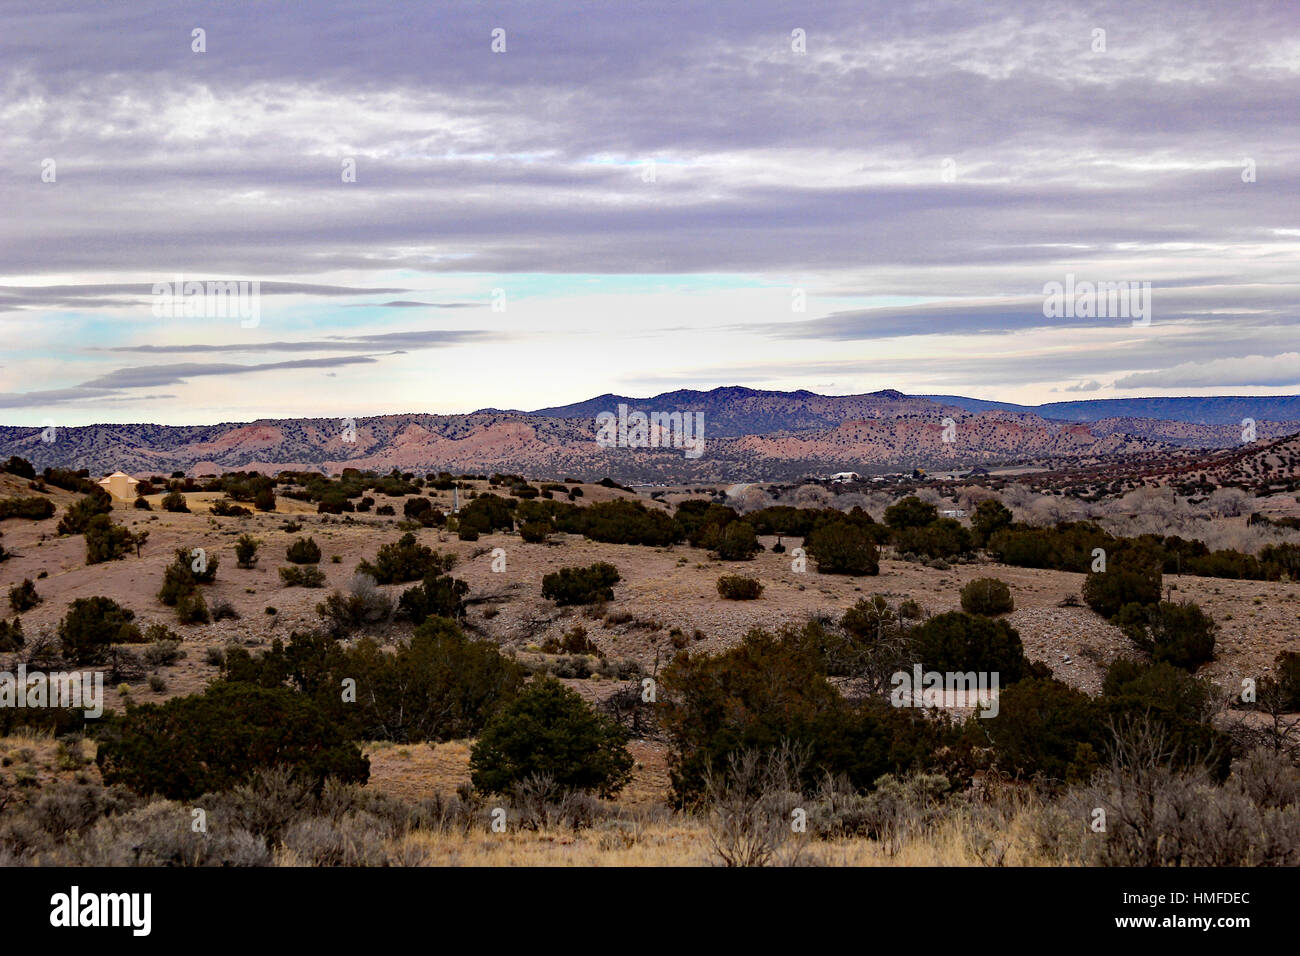 The view atop a backwoods mesa with the mountains in the distance at sunset Stock Photo